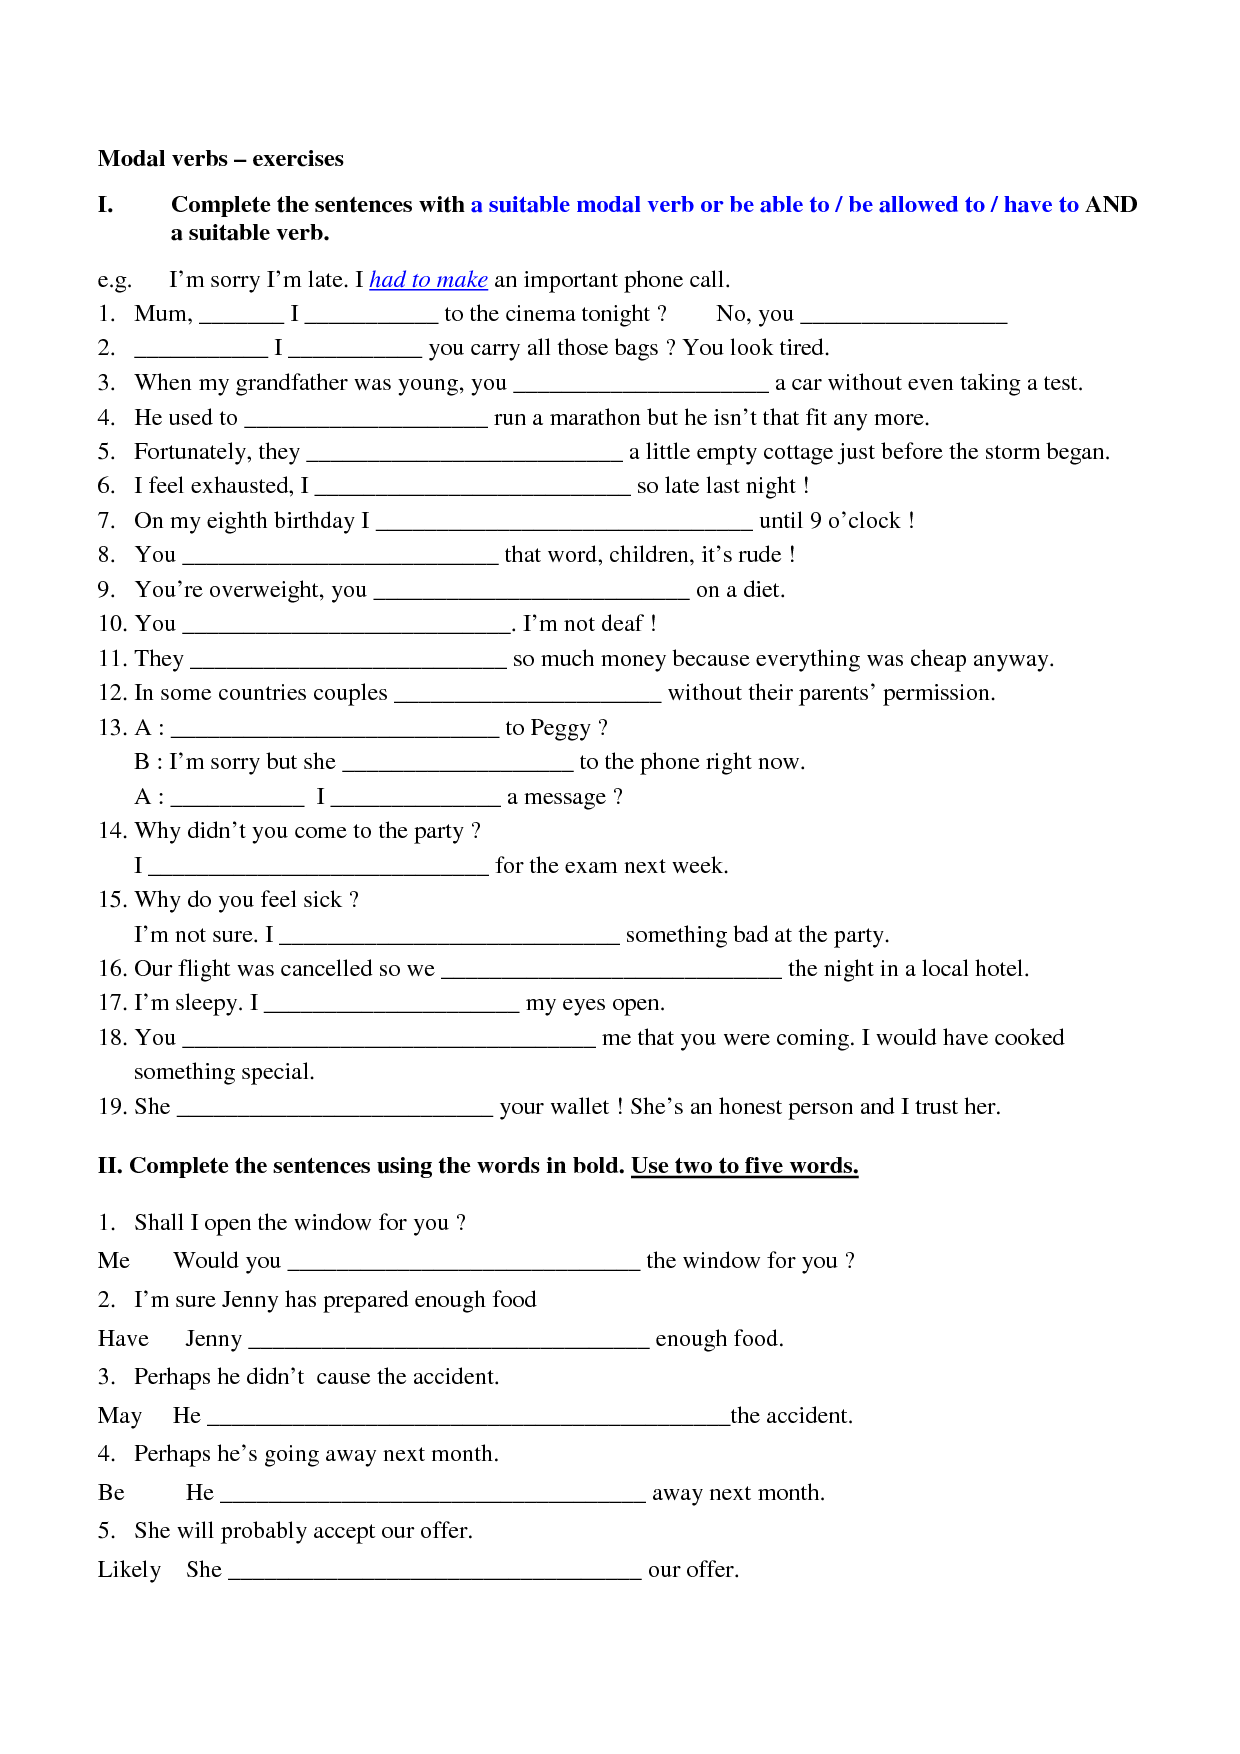 14-best-images-of-modals-esl-worksheets-modal-auxiliary-verbs